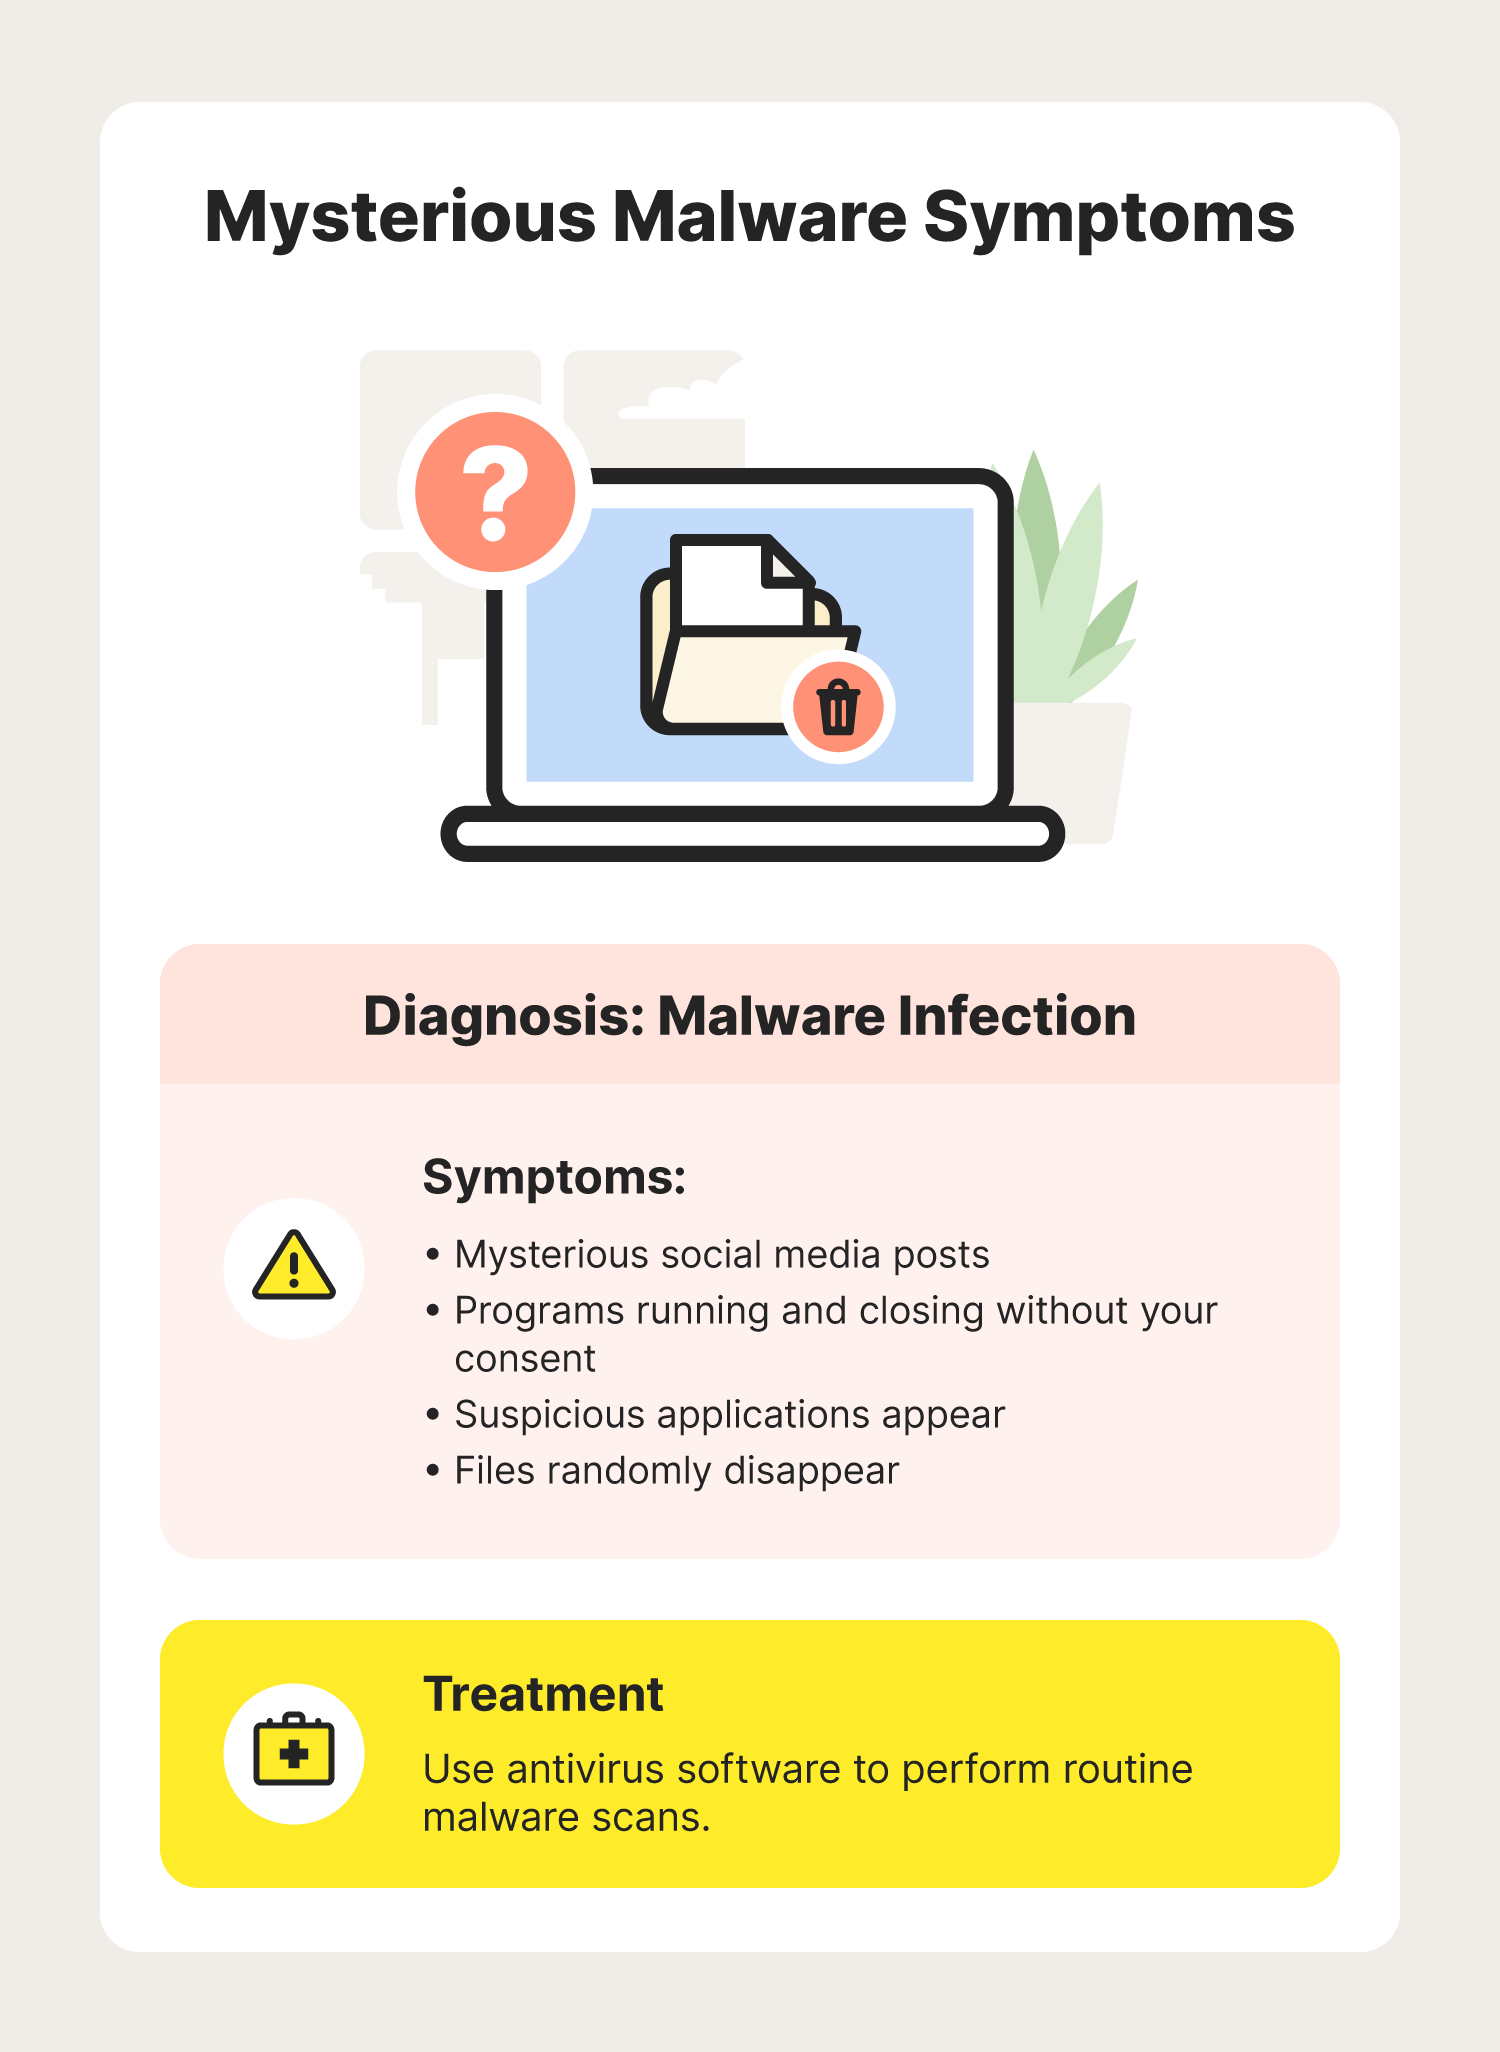 A graphic showcases mysterious symptoms that are signs of malware.